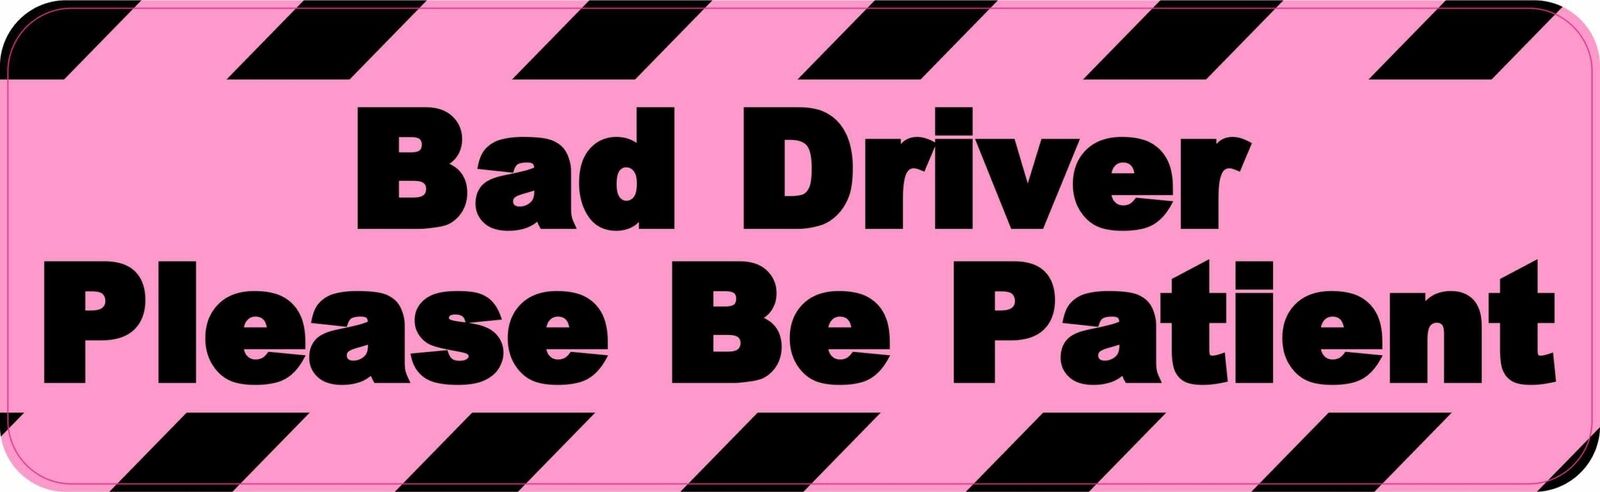 10in x 3in Please Be Patient Bad Driver Magnet Car Truck Vehicle Magnetic Sign